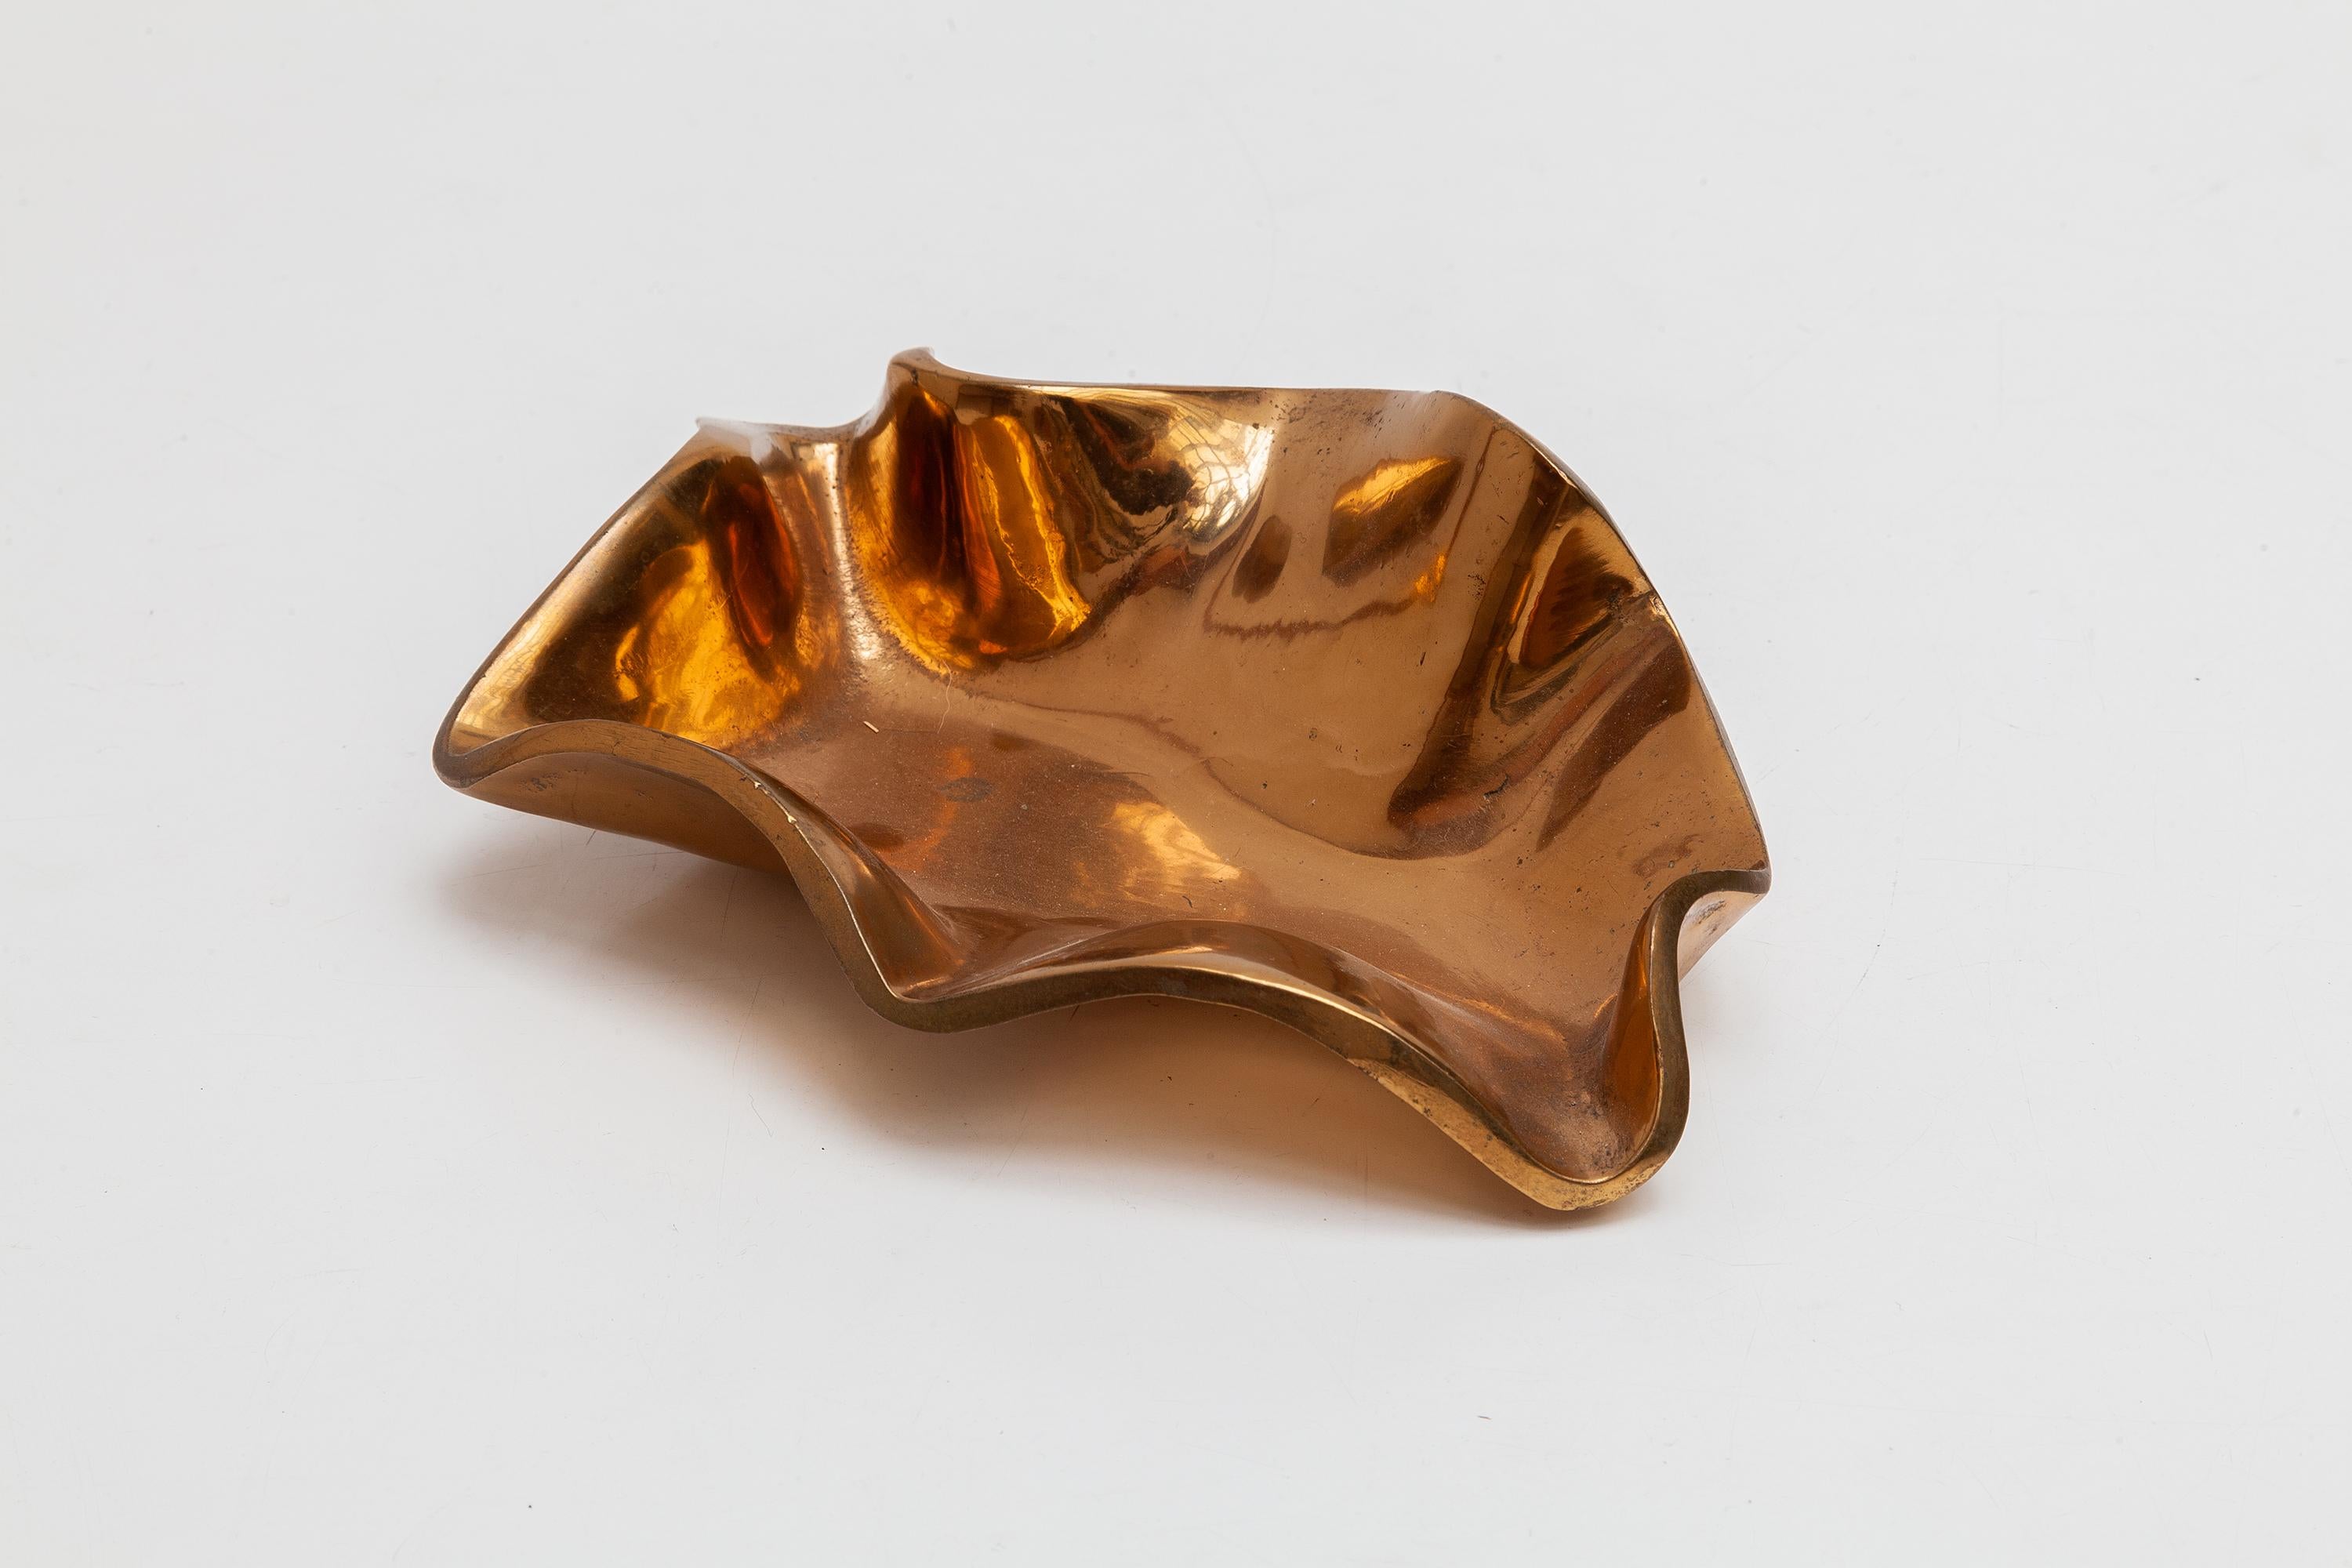 Vintage midcentury decorative bronze dish with organic wavy edge. Signed by the artist.
Measures: 26 W x 6 H x 15 D cm.